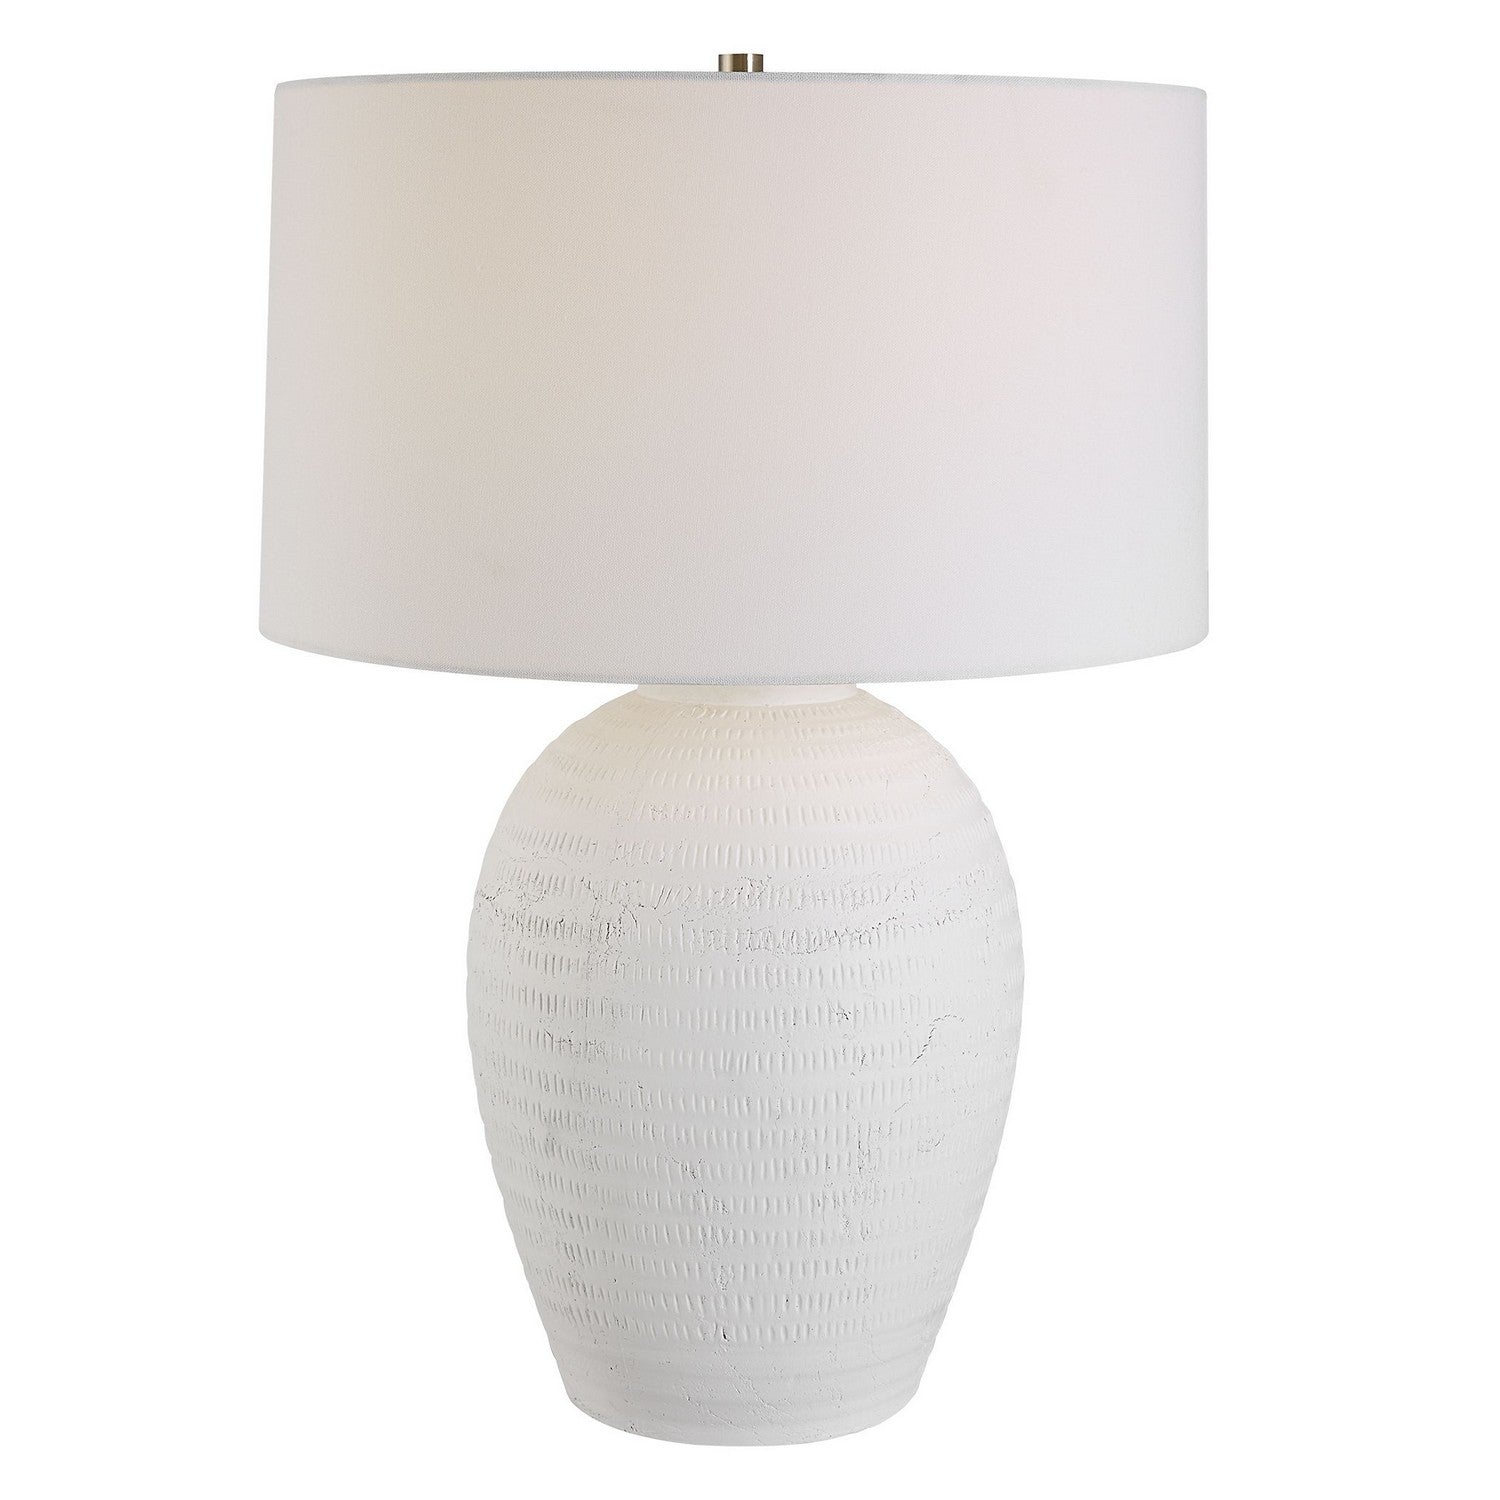 Uttermost - 30236-1 - One Light Table Lamp - Reyna - Brushed Nickel